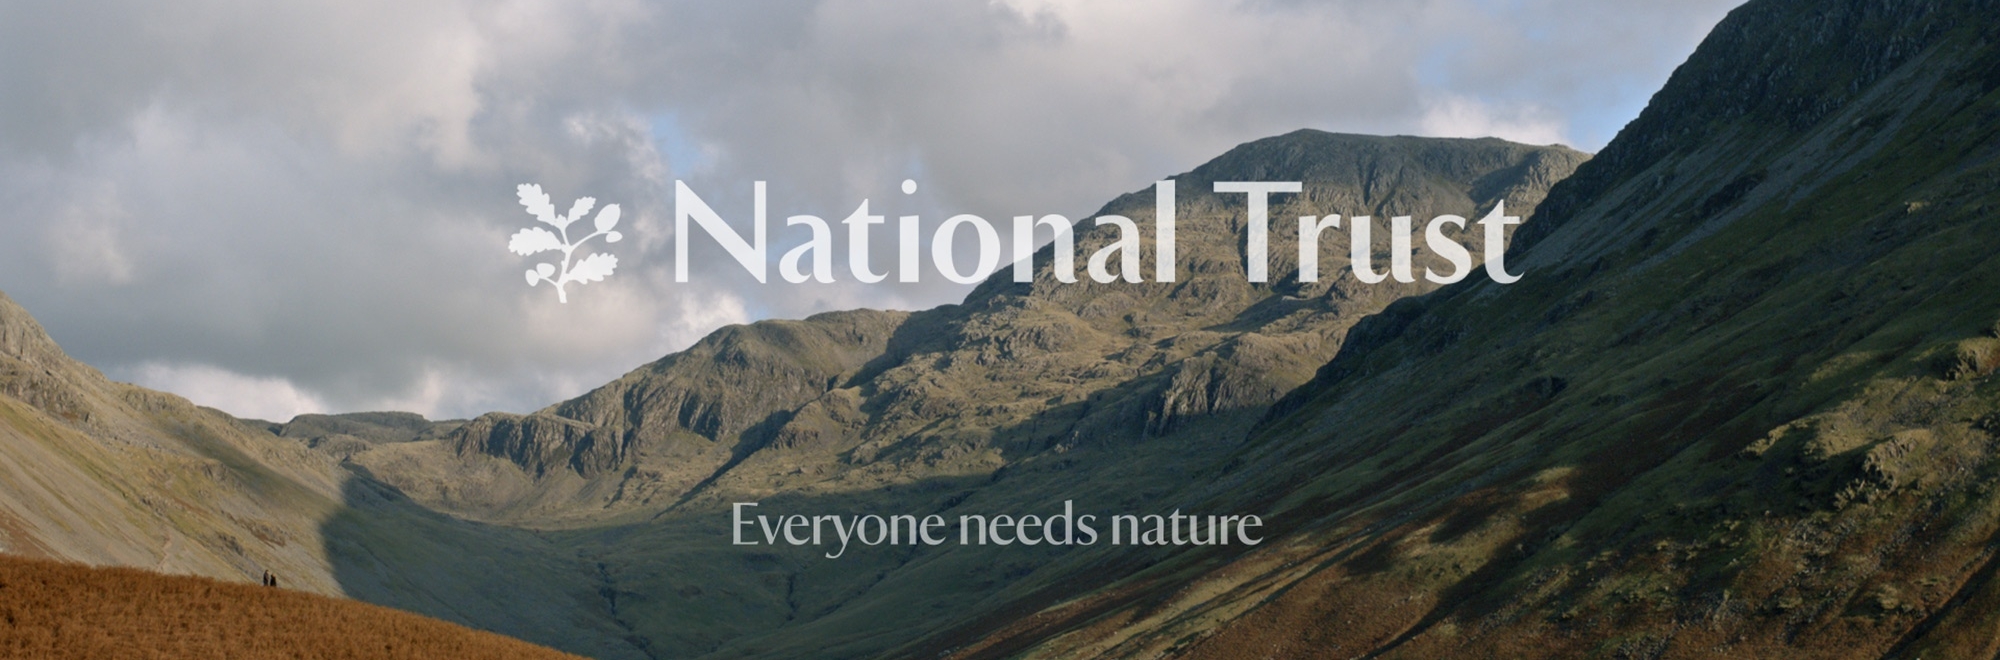 National Trust creates a sense of calm with Wieden+Kennedy to encourage donations following coronavirus losses